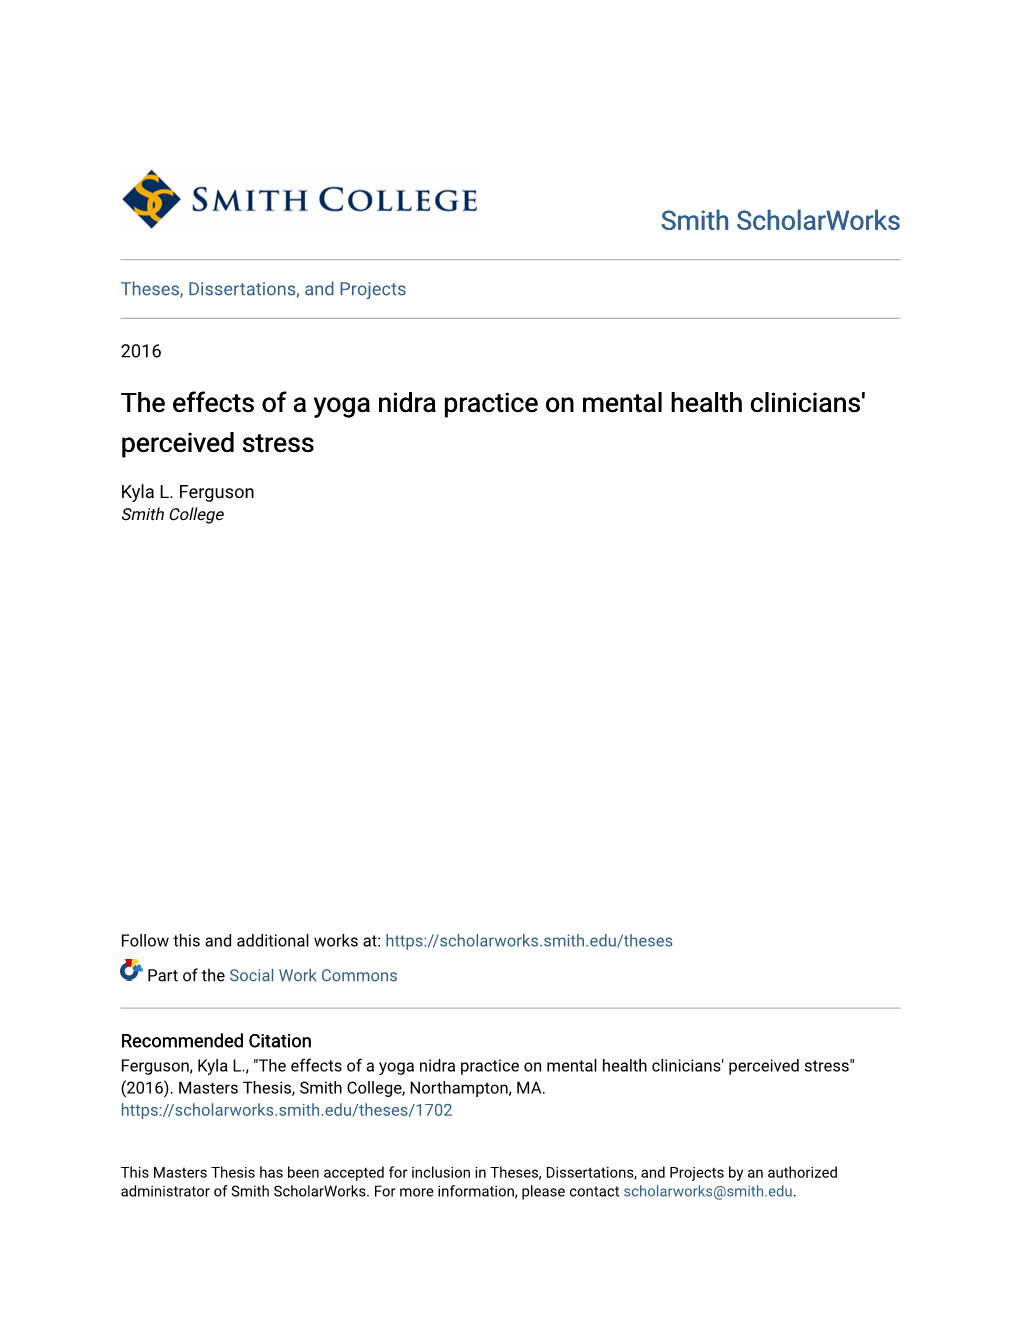 The Effects of a Yoga Nidra Practice on Mental Health Clinicians' Perceived Stress